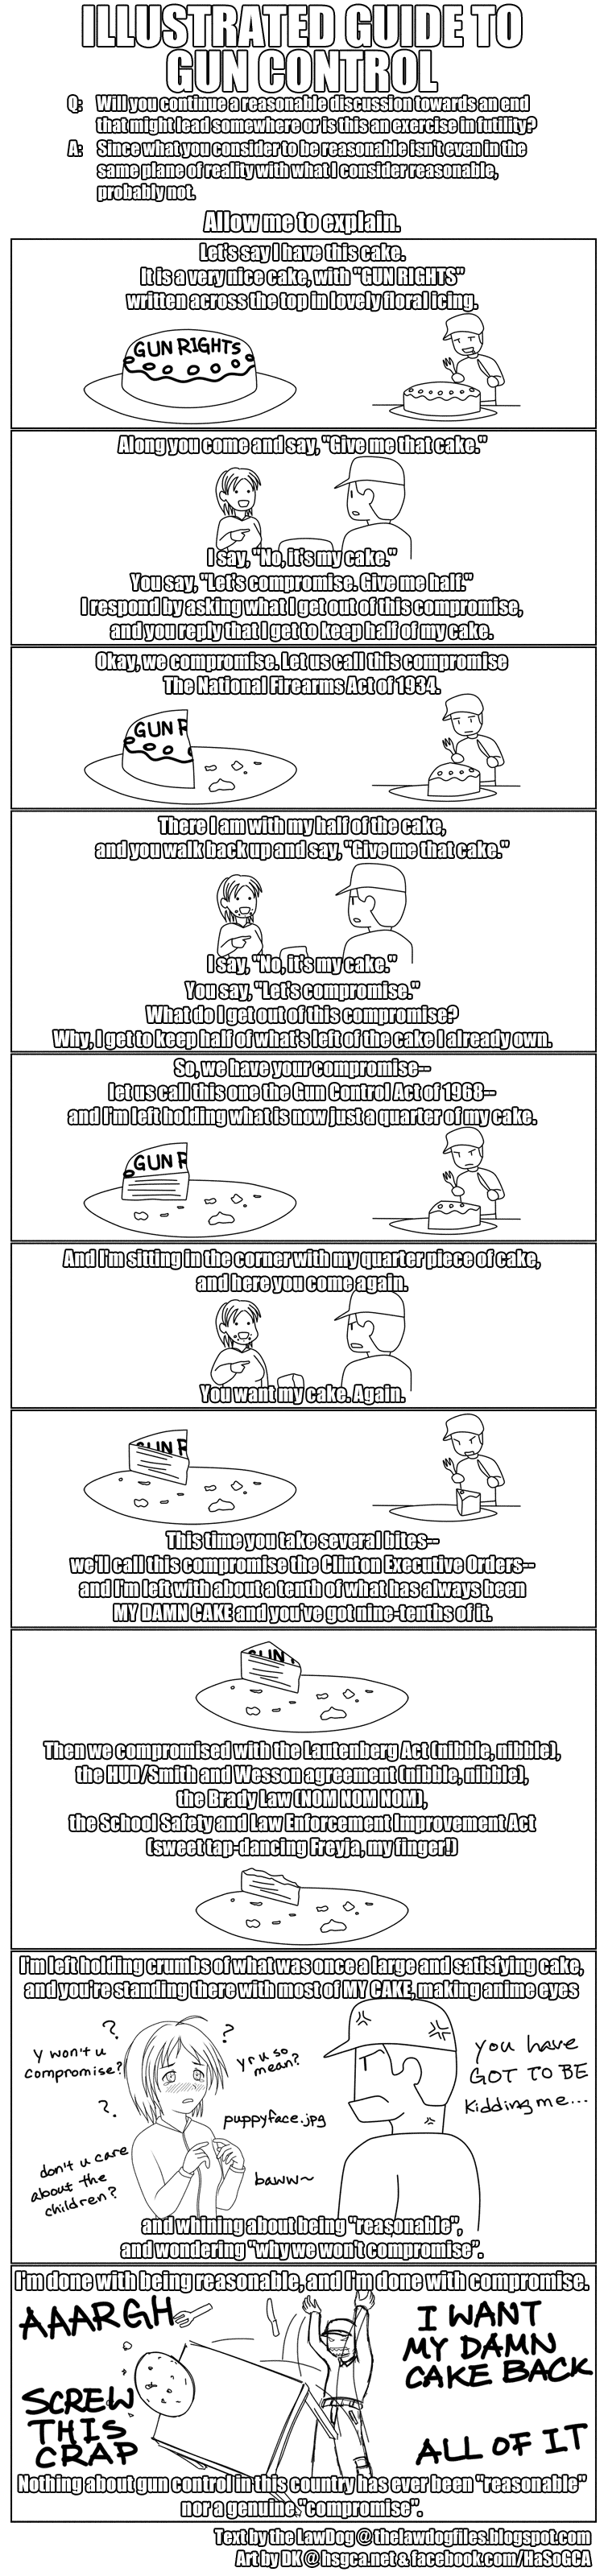 Illustrated-Guide-To-Gun-Control.png